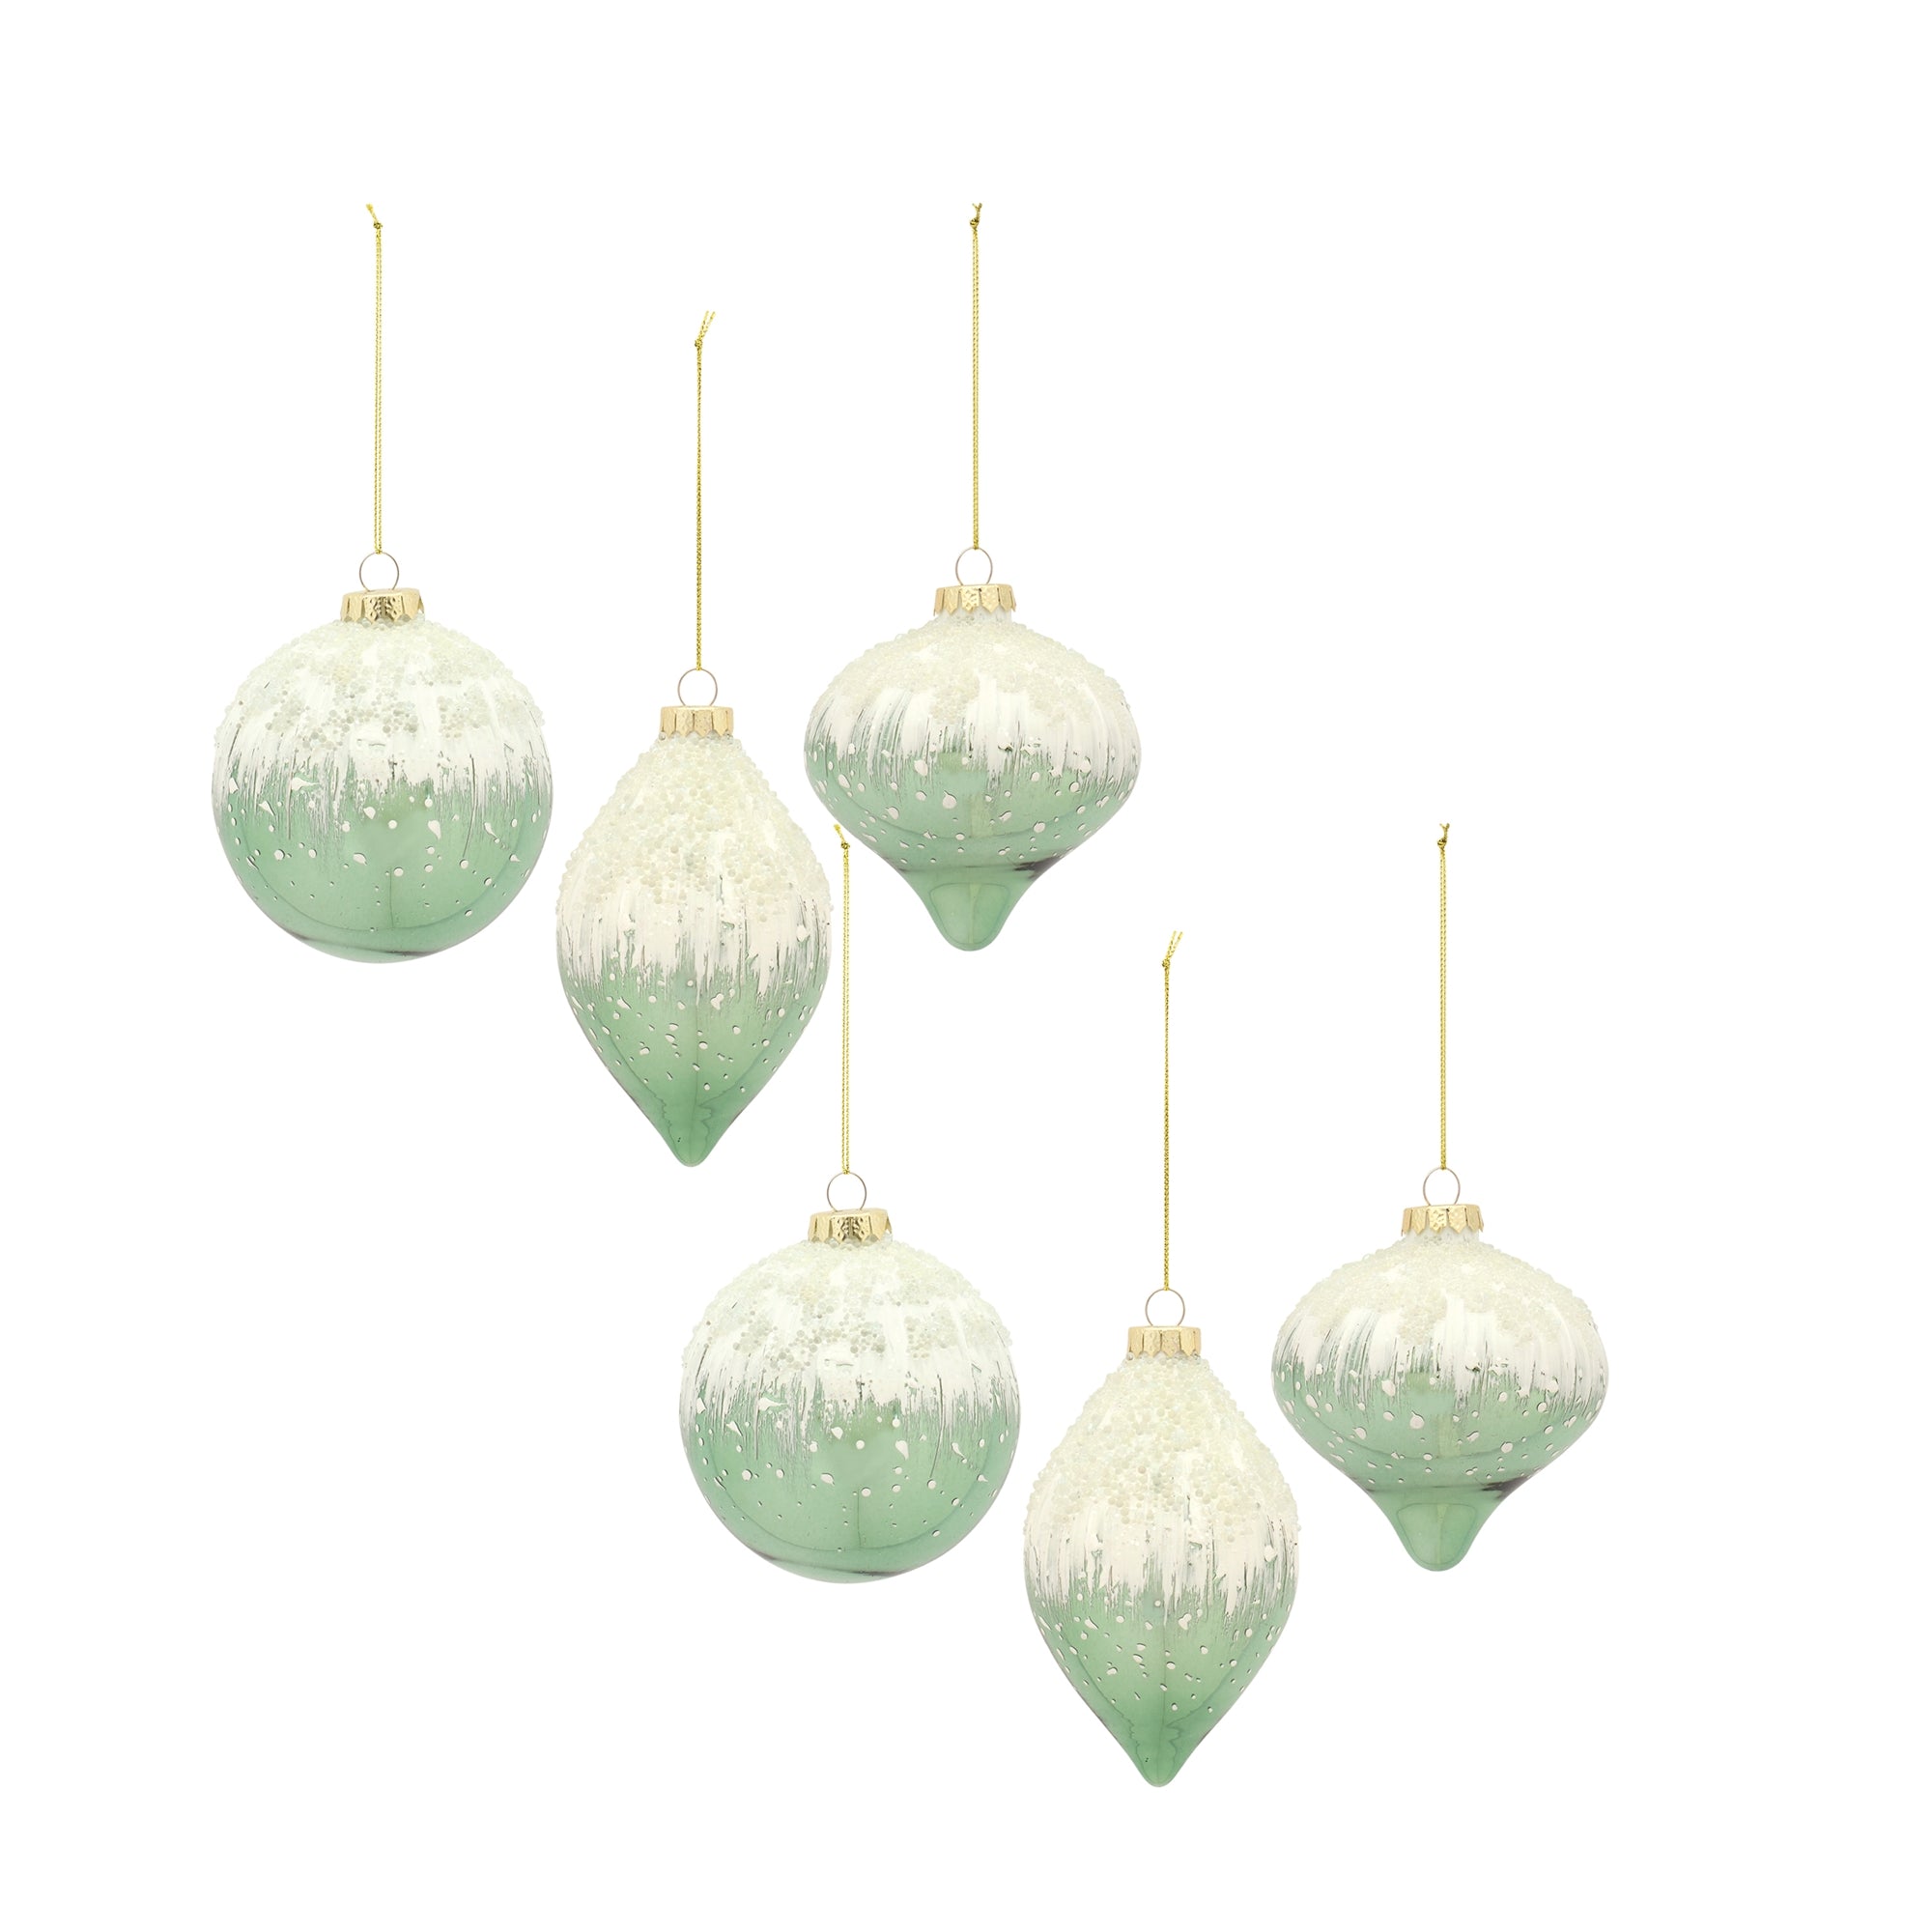 Sage Green w/ Snow Accent Ornaments (S/6)